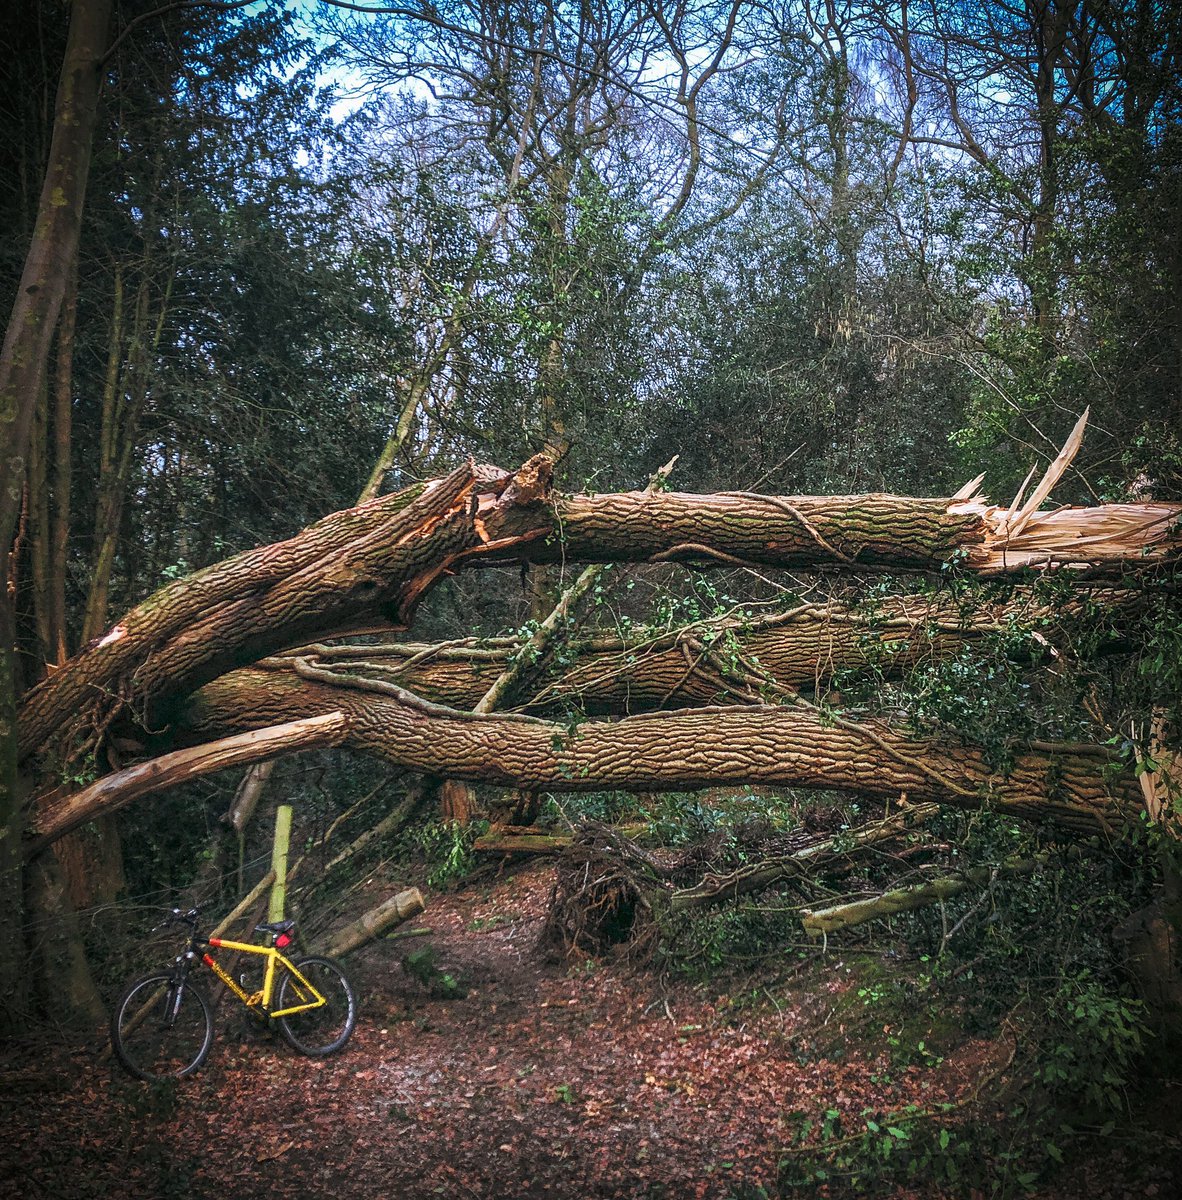 Still stormy! #tree casualty of #StormGareth #nature #naturephotography #surrey #forest #storm #woodland #OurWorldIsWorthSaving #ClimateChange #natural